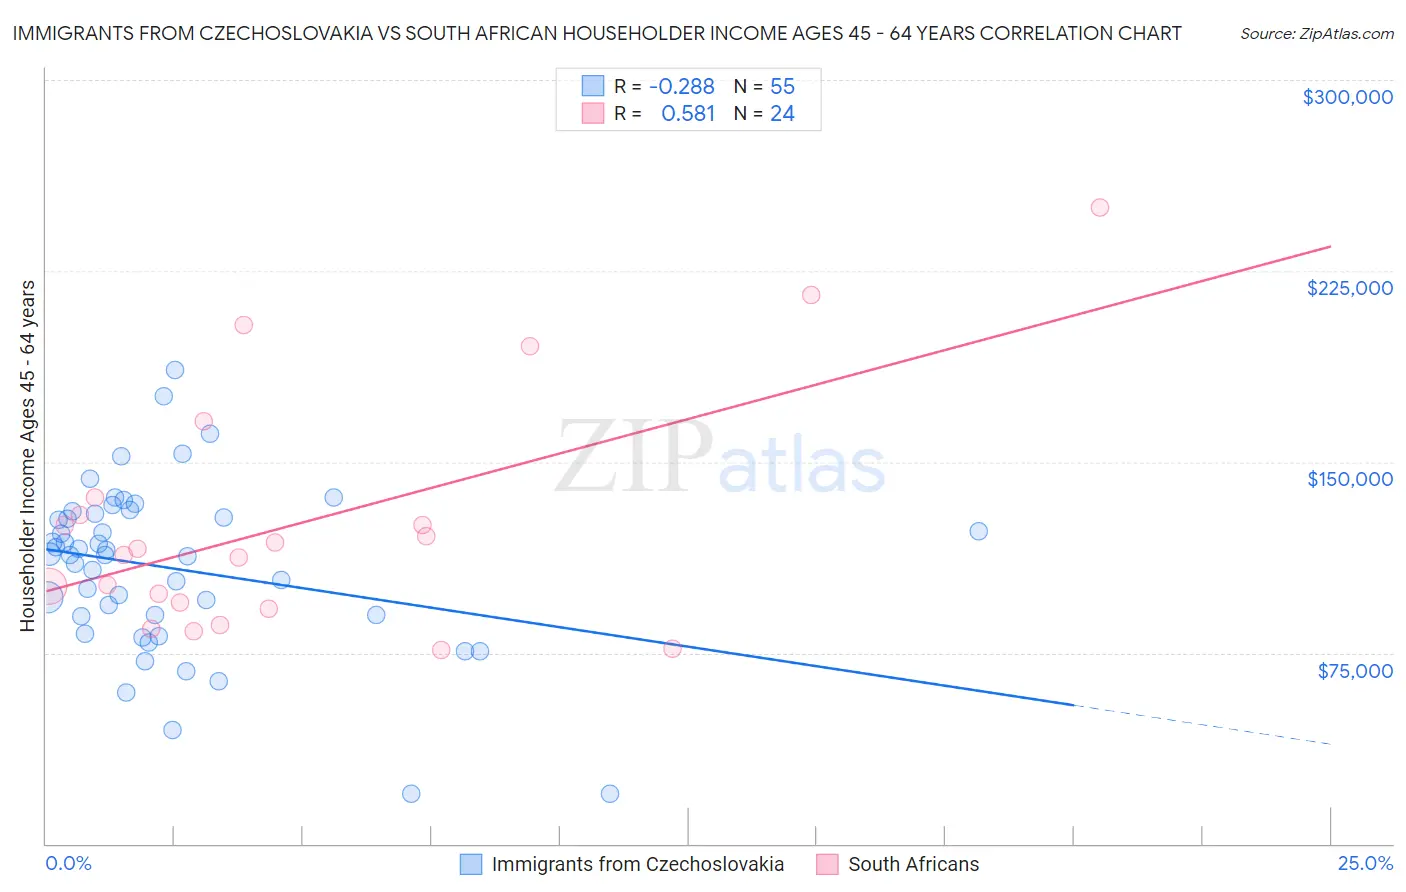 Immigrants from Czechoslovakia vs South African Householder Income Ages 45 - 64 years